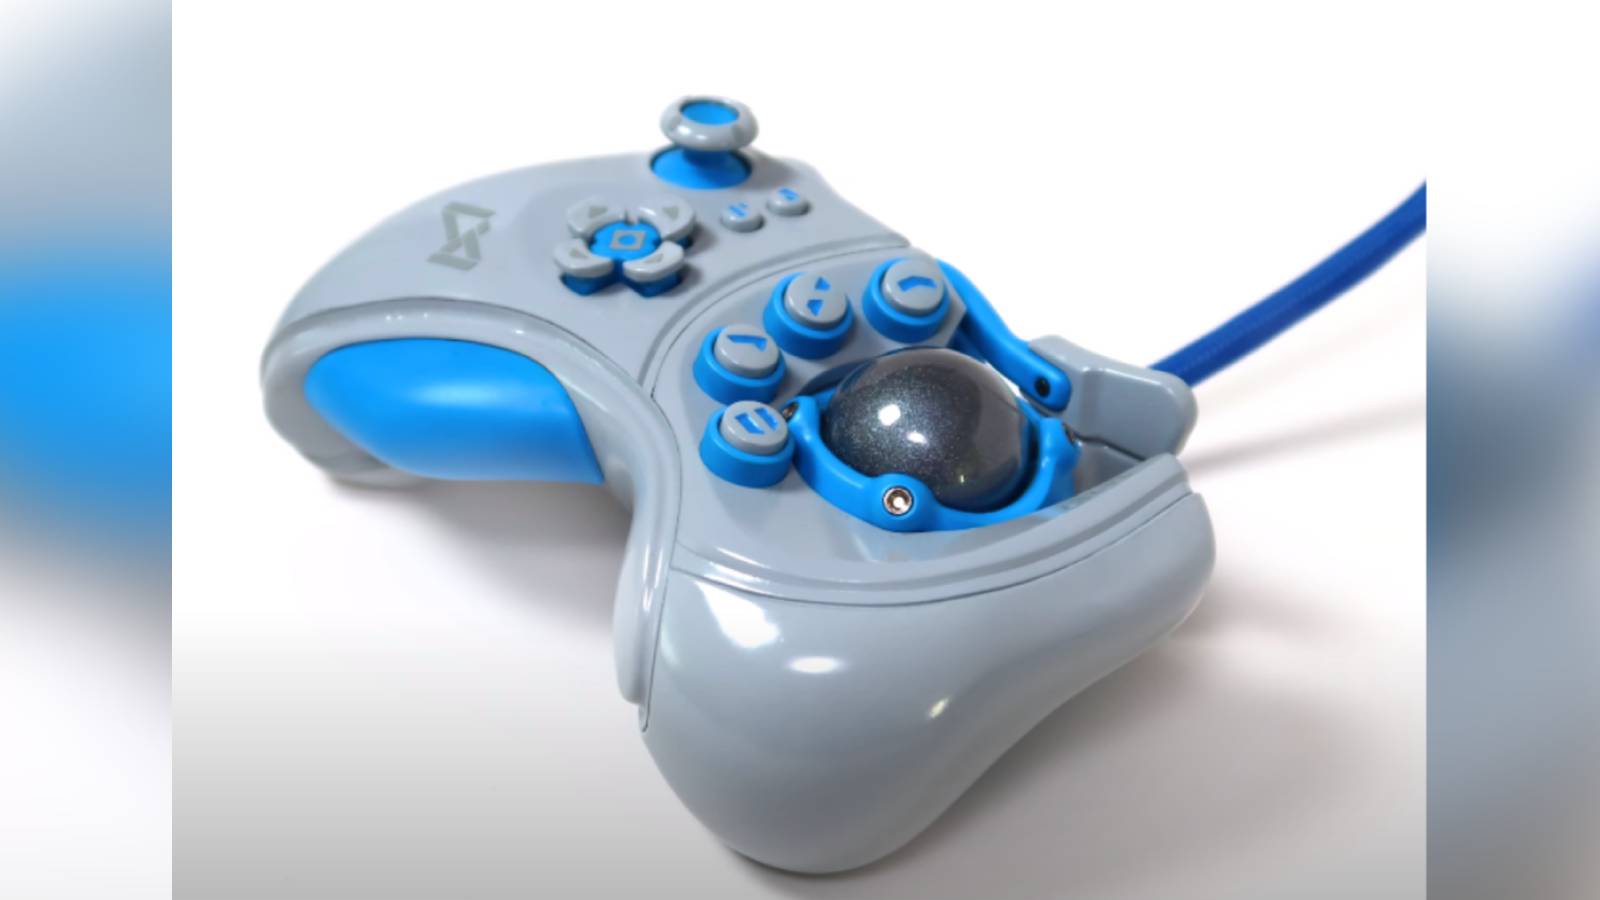 Screenshot of the "ultimate FPS controller" by PyottDesign on YouTube.